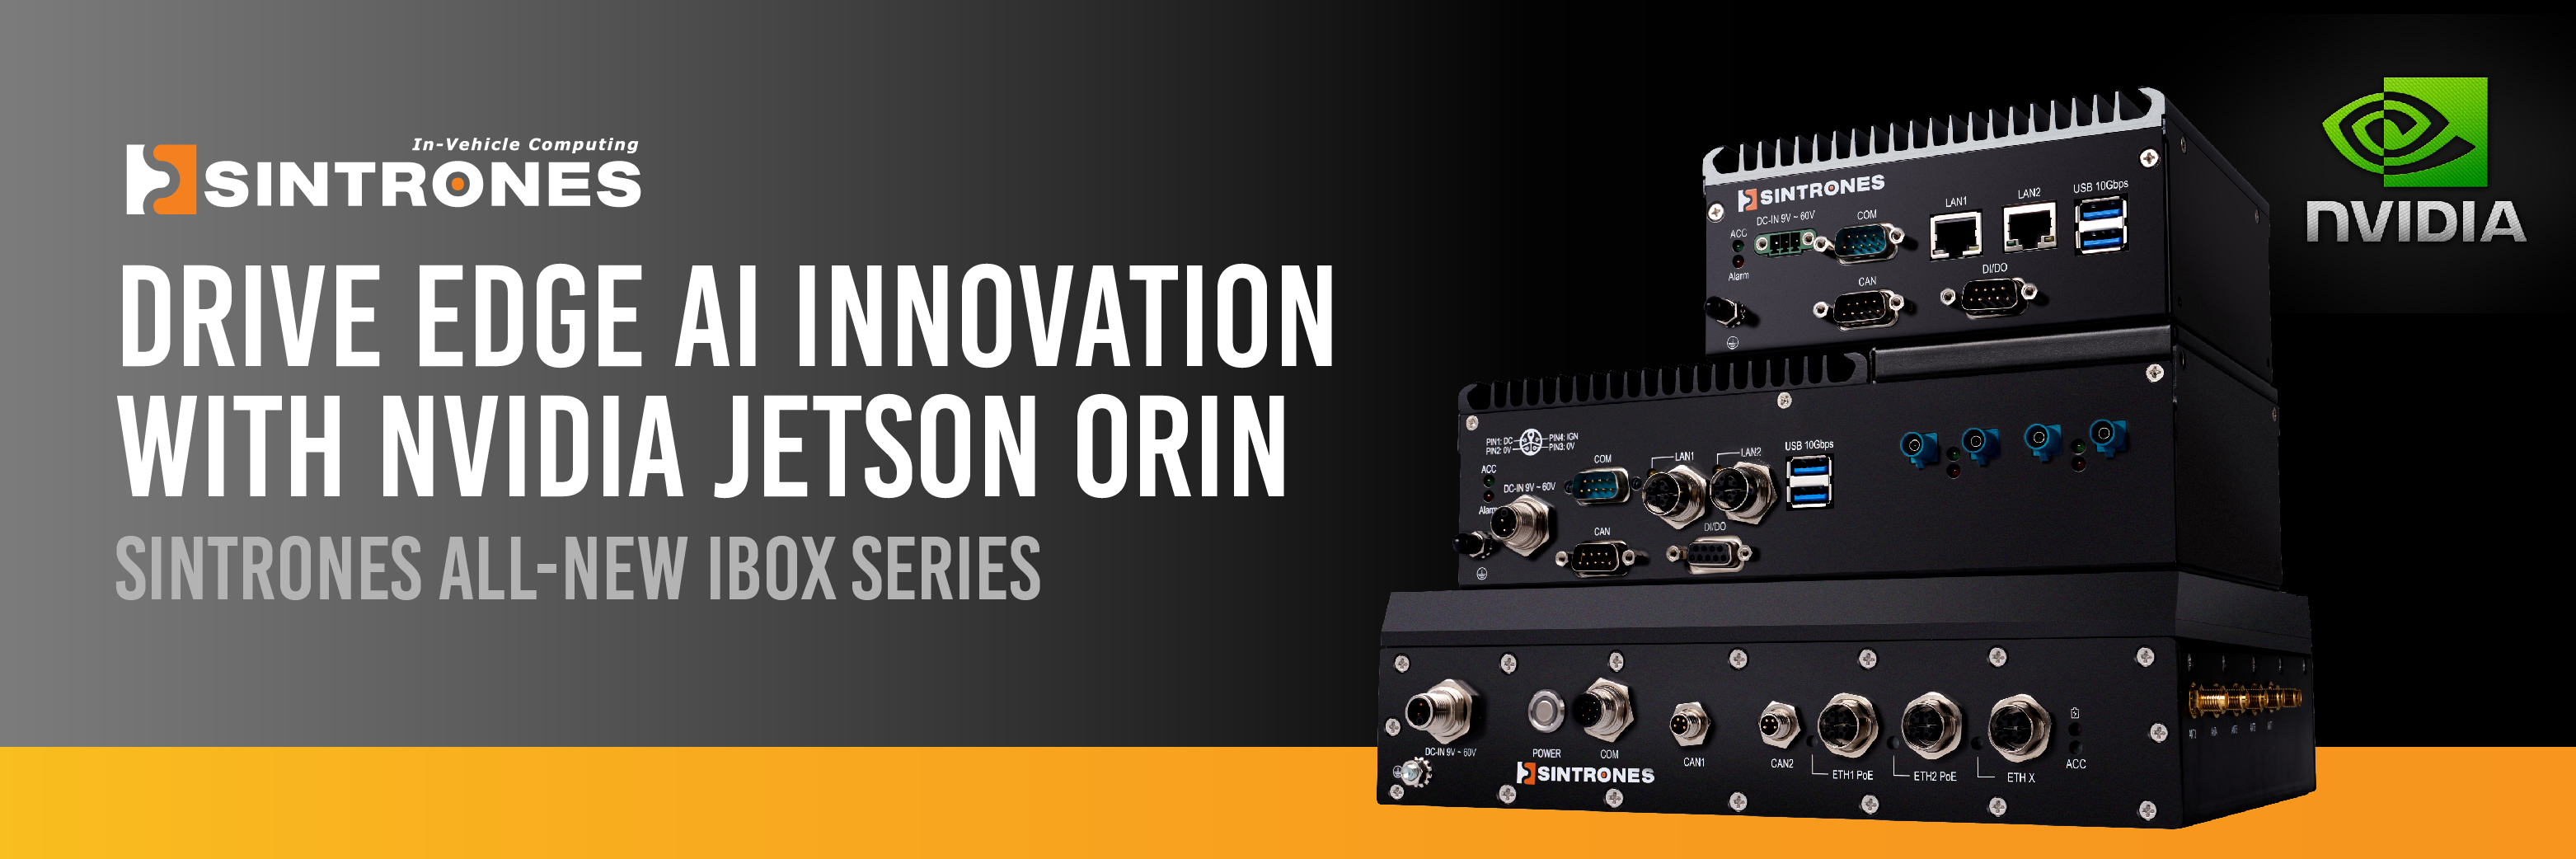 SINTRONES Drives Edge AI Innovation with NVIDIA Jetson Orin_All-New IBOX Series_20240717